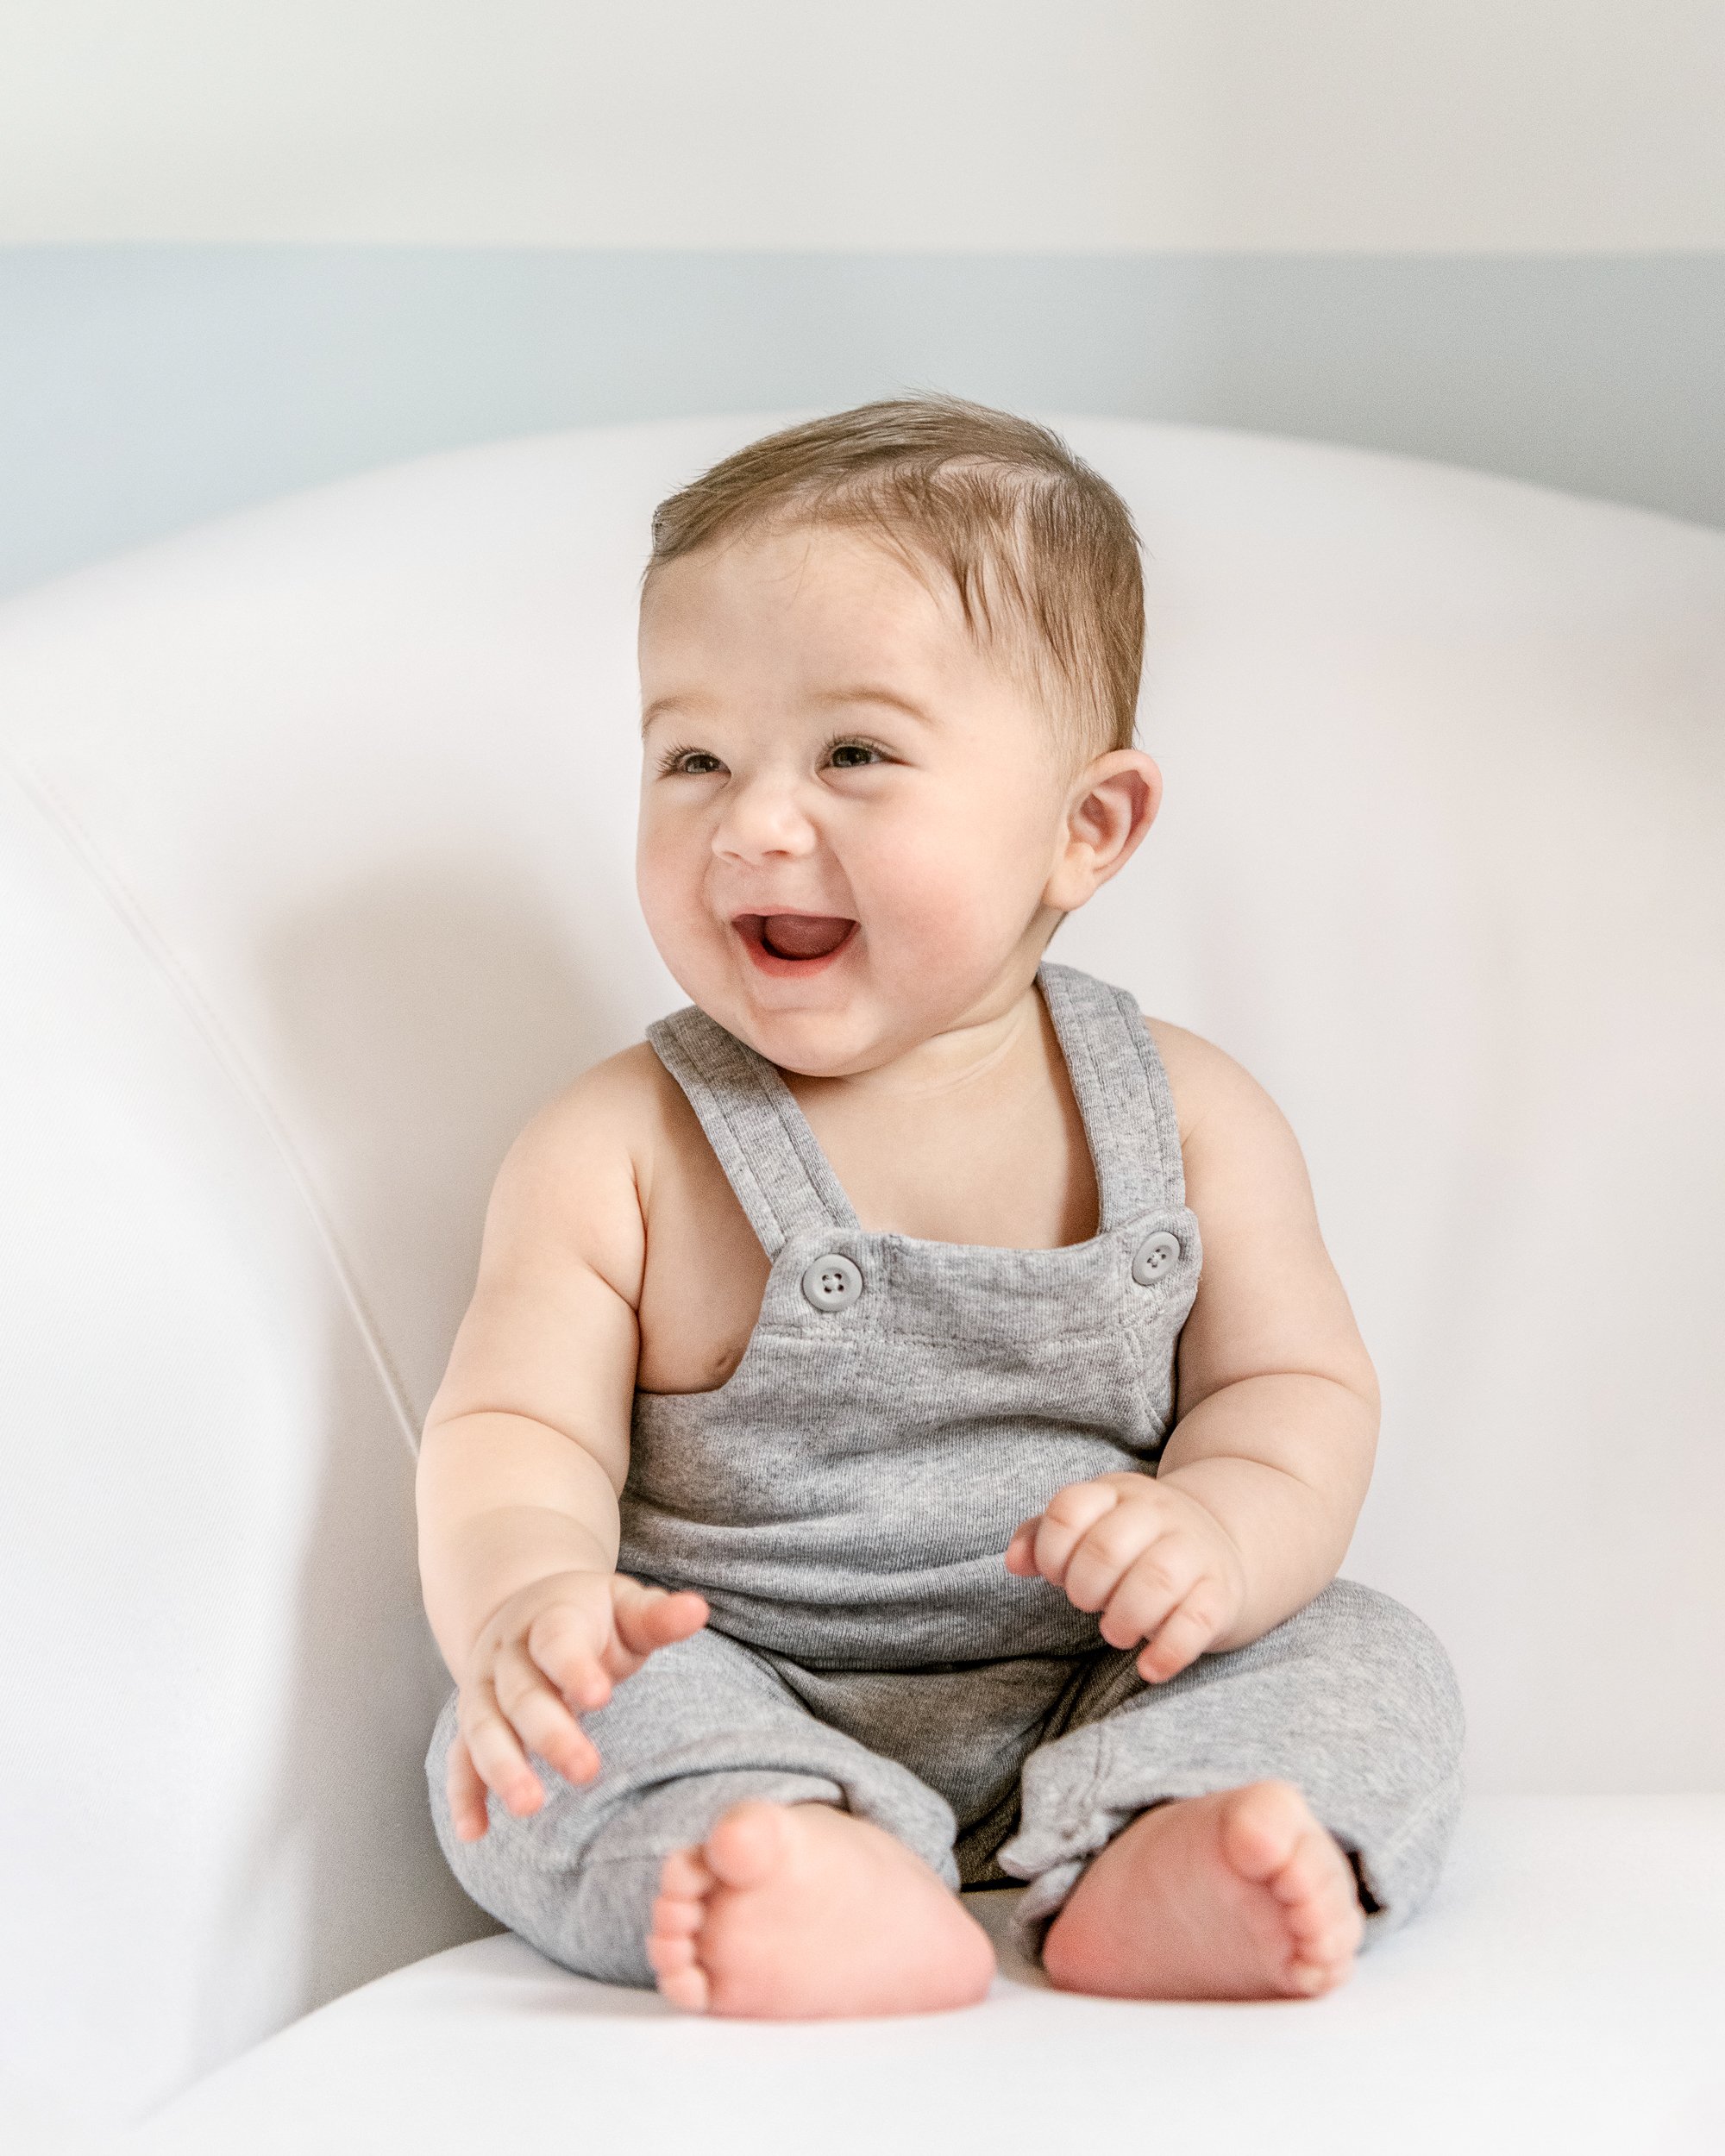  Nicole Hawkins Photography captures a smiley little boy in gray overalls during a 6-month milestone session. NJ photog #NicoleHawkinsPhotography #NicoleHawkinsMilestones #BabyMilestoneSession #NJfamilyphotographer #Inhomephotography #babyportraits 